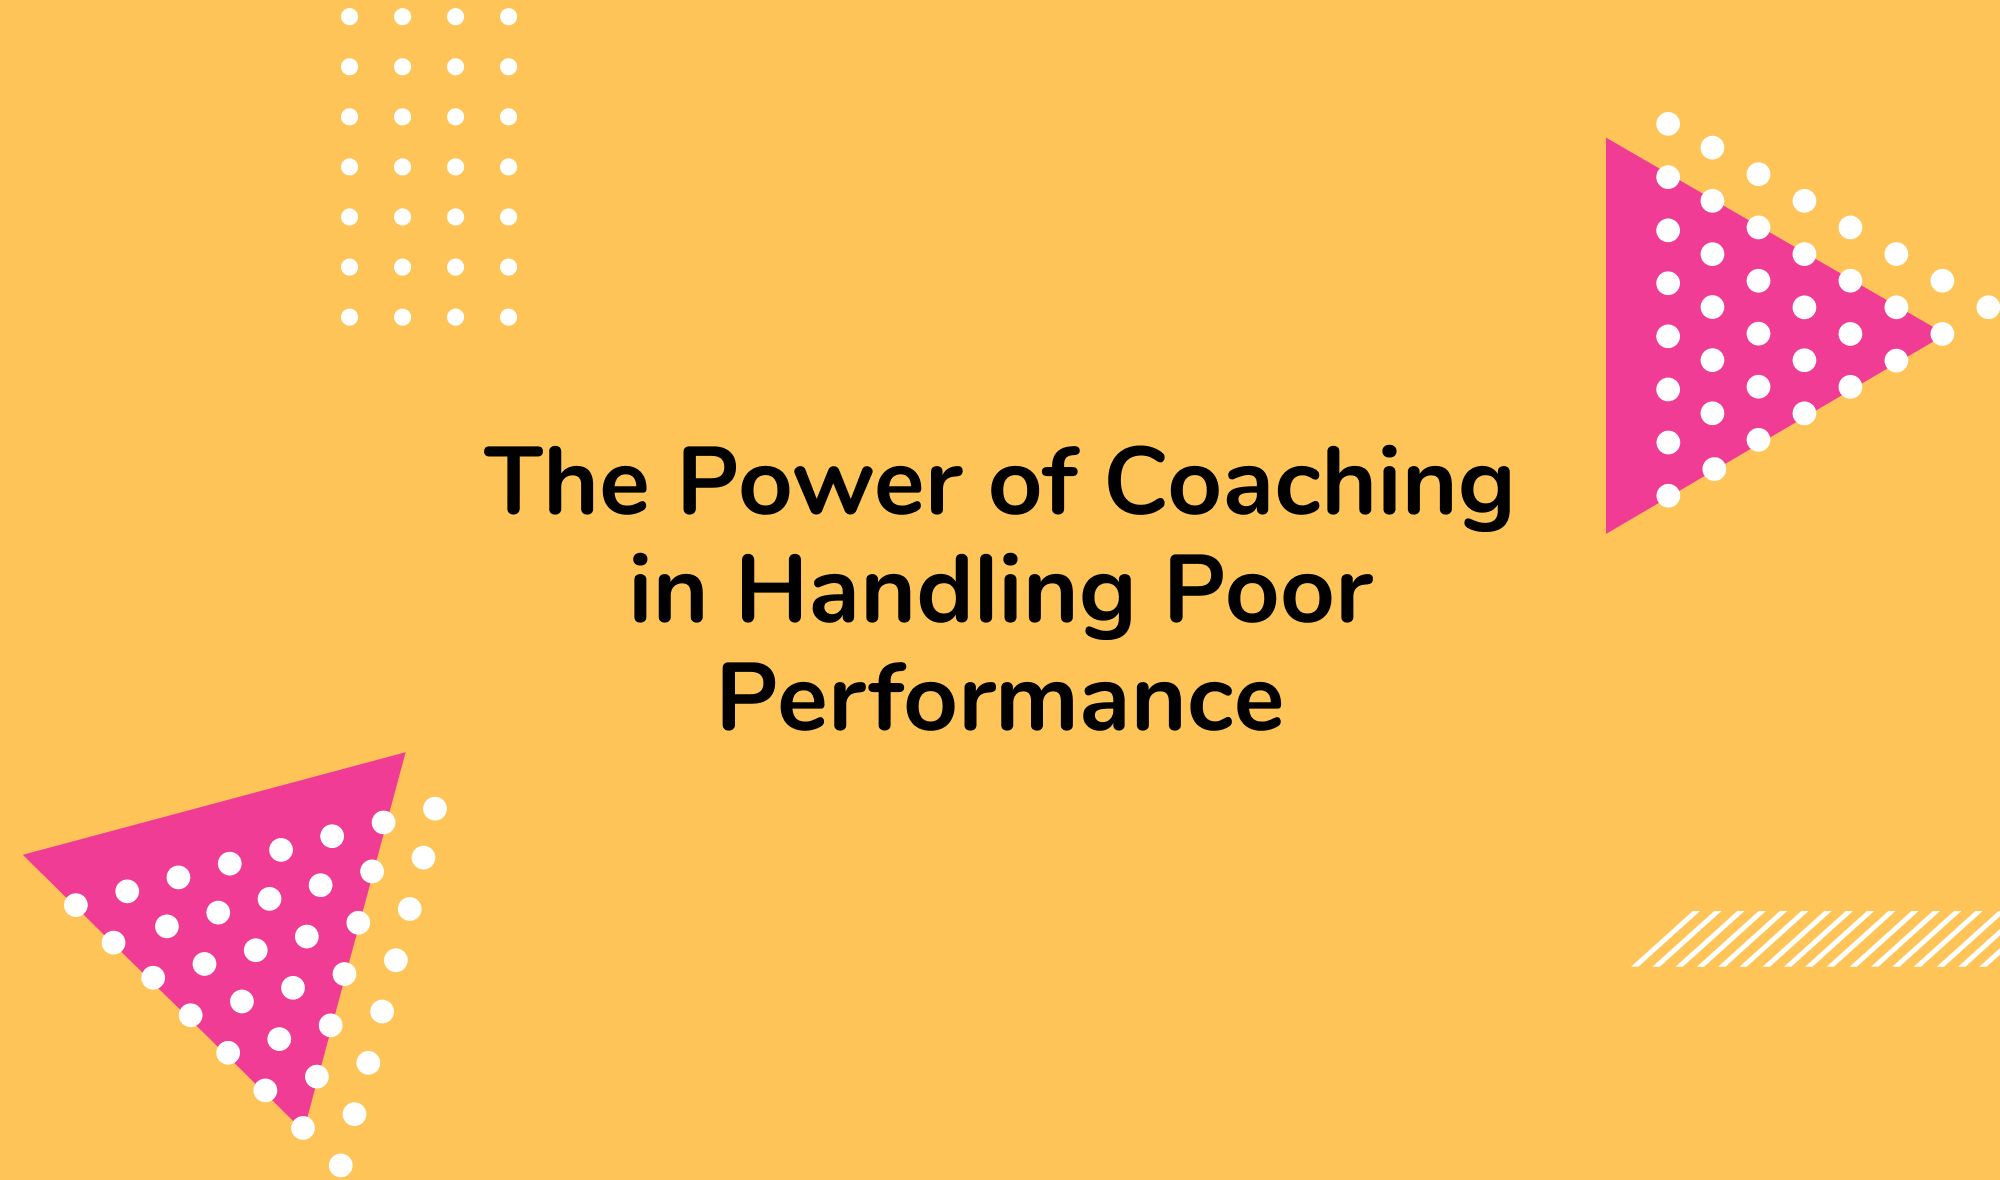 The Power of Coaching in Handling Poor Performance